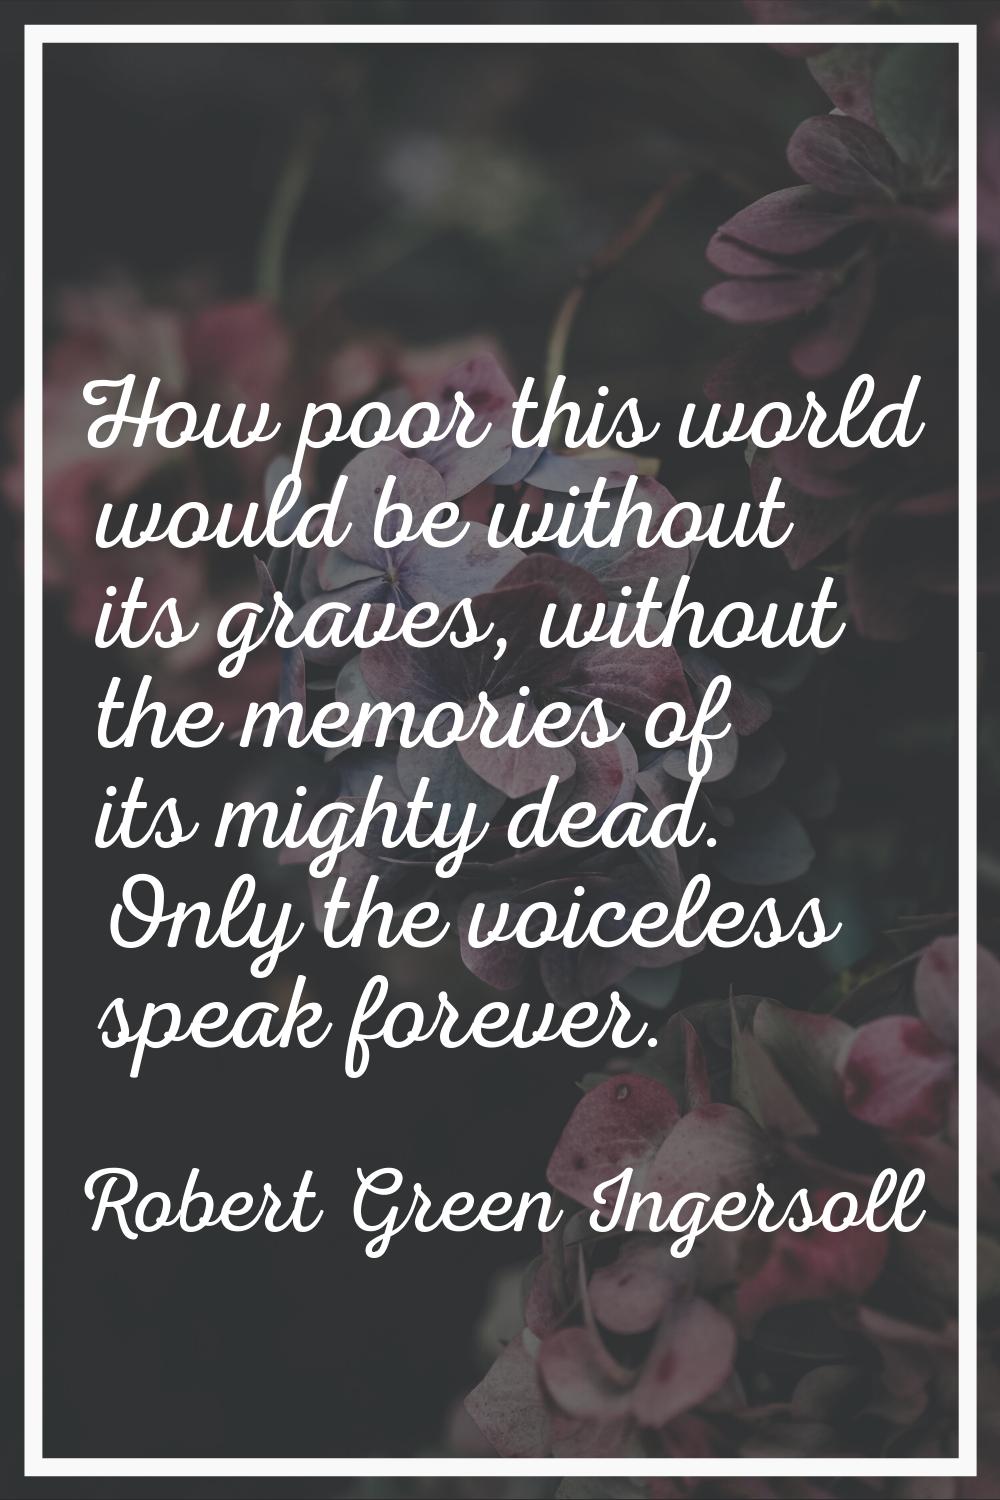 How poor this world would be without its graves, without the memories of its mighty dead. Only the 